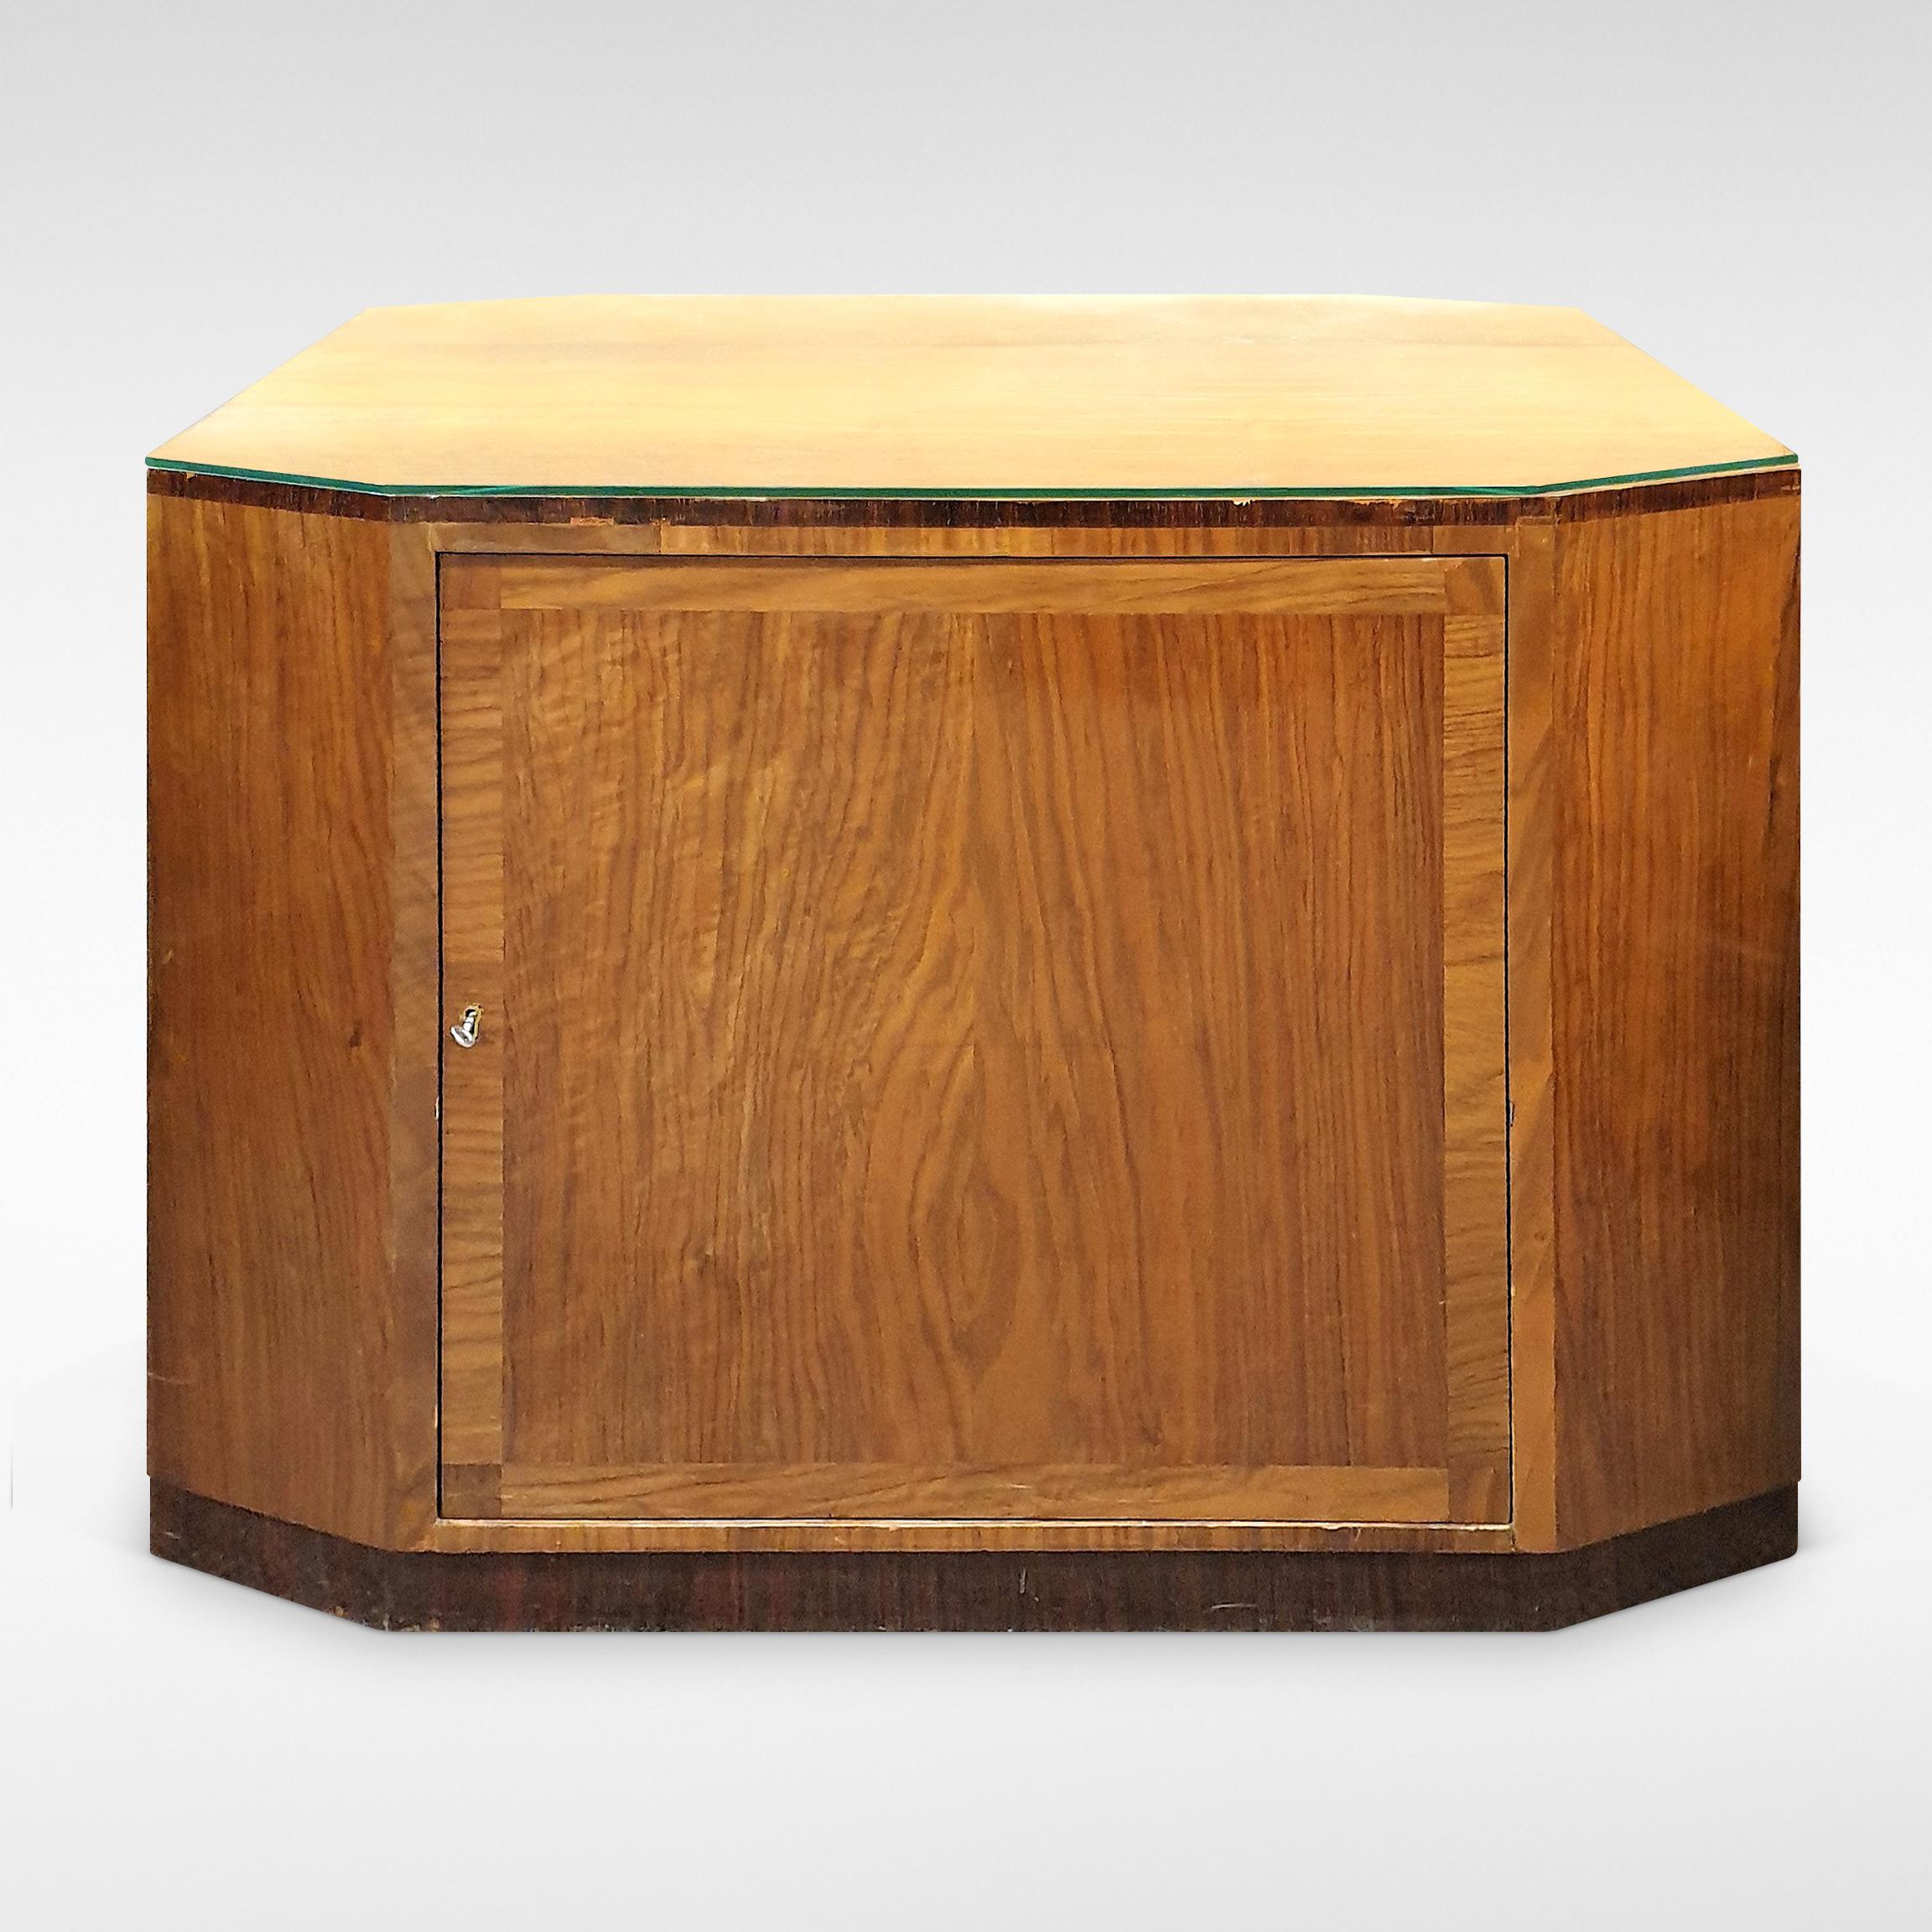 Art Deco Cocktail Table in Walnut and Macassar Ebony For Sale 2